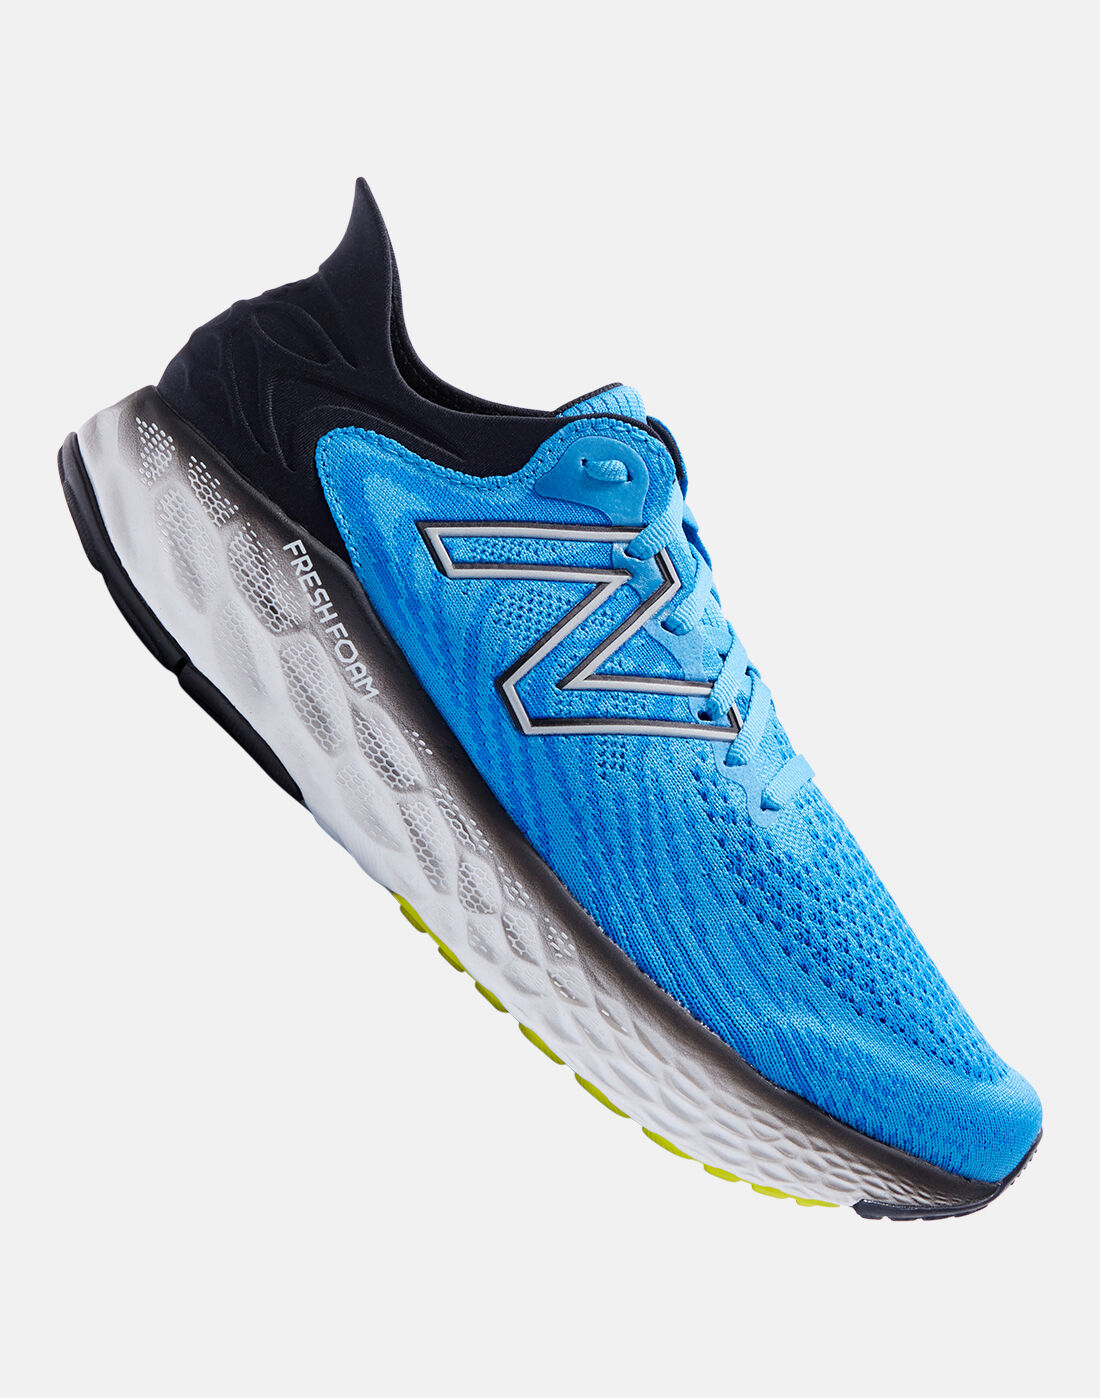 new balance running shoes price in pakistan